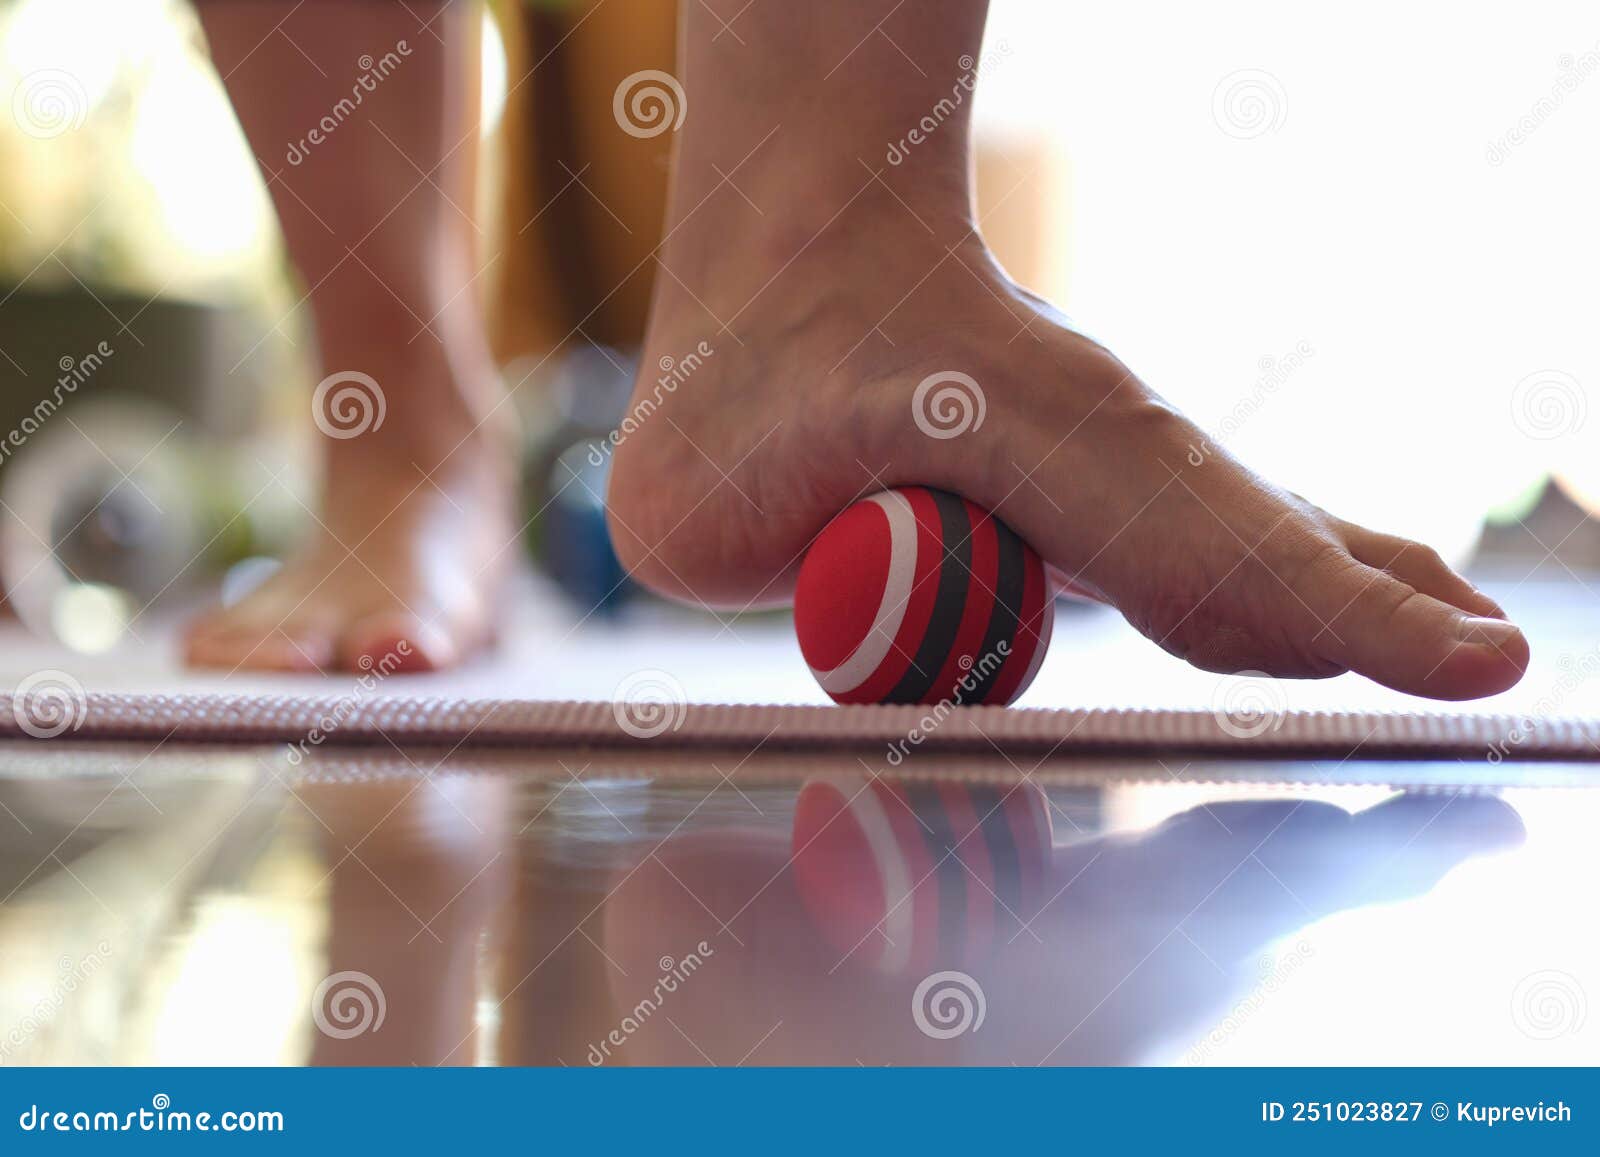 myofascial relaxation of hypermobile muscles of foot with a massage ball closeup